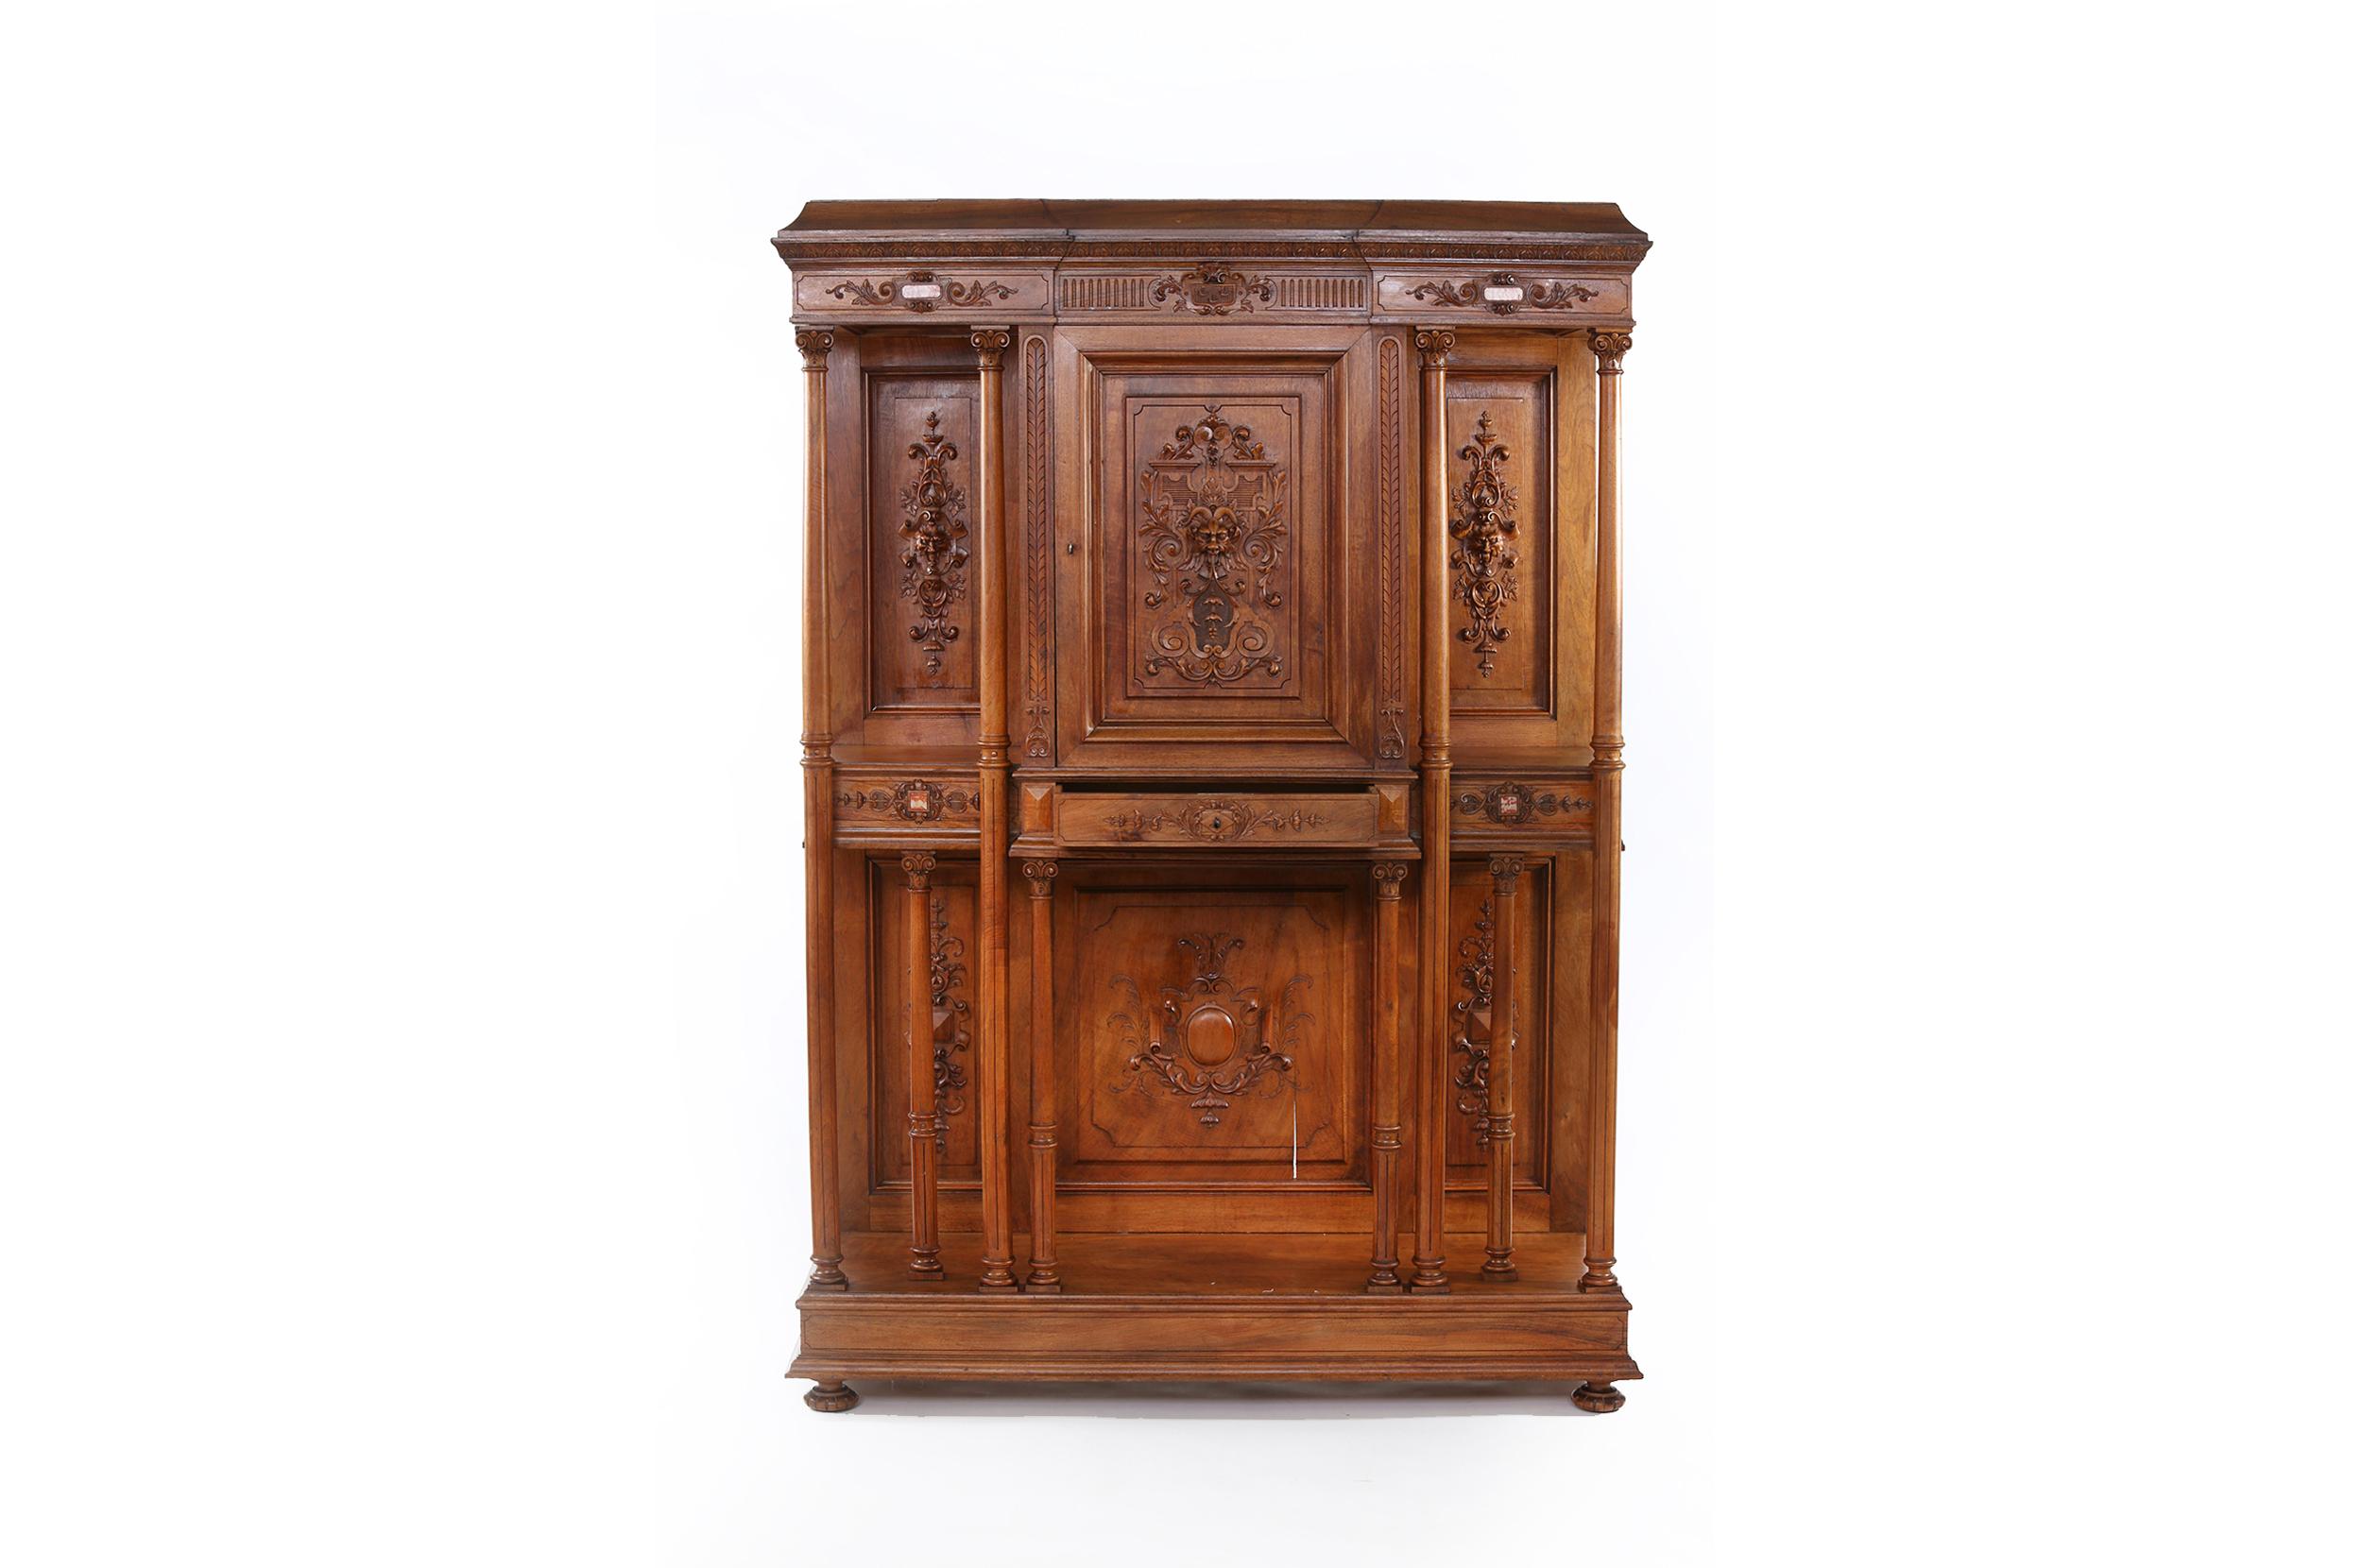 Early 19th century French renaissance revival hand carved walnut with marble inserted reserve display wall cabinet. The cabinet is in good antique condition with appropriate wear consistent with age / use. The cabinet stands about 75 inches tall x